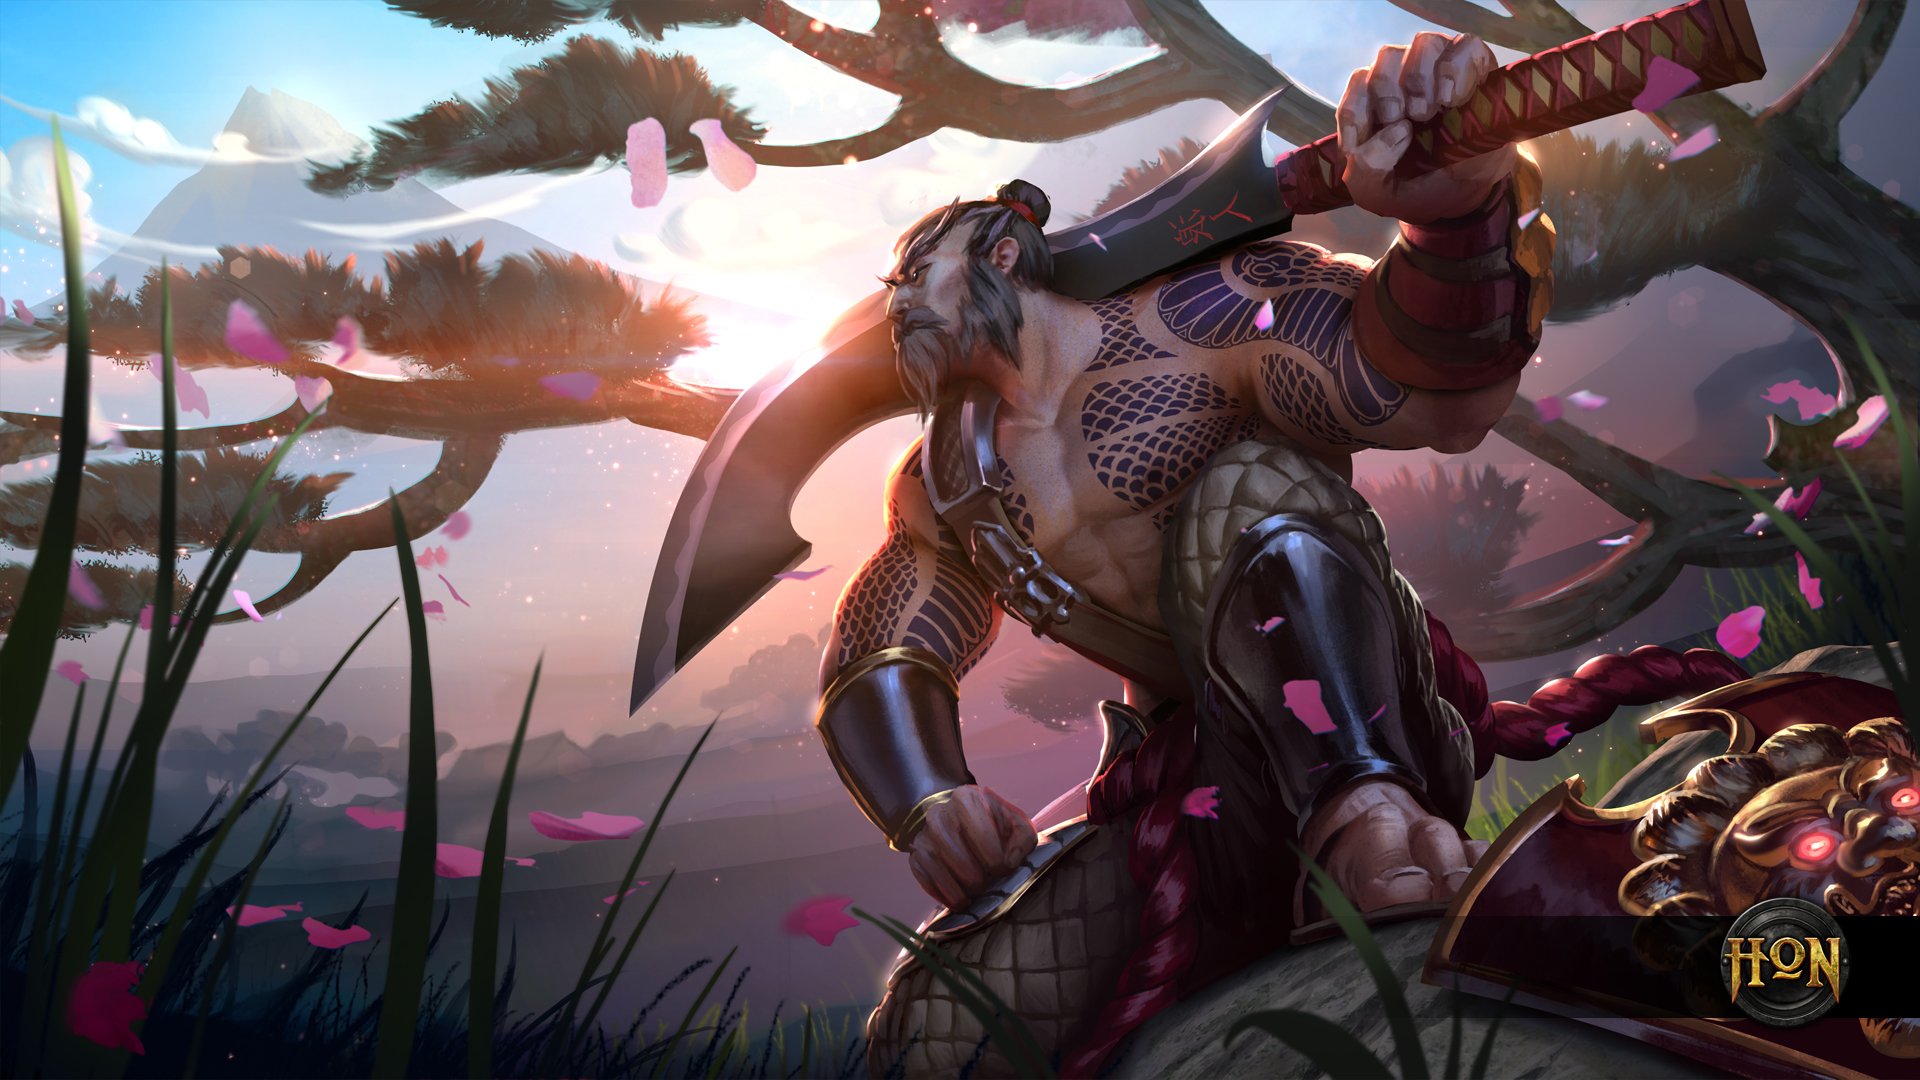 heroes, Of, Newerth, Arena, Mmo, Online, Fighting, Fantasy, 1hon, Moba, Action, Hon, Warrior, Sci fi Wallpaper